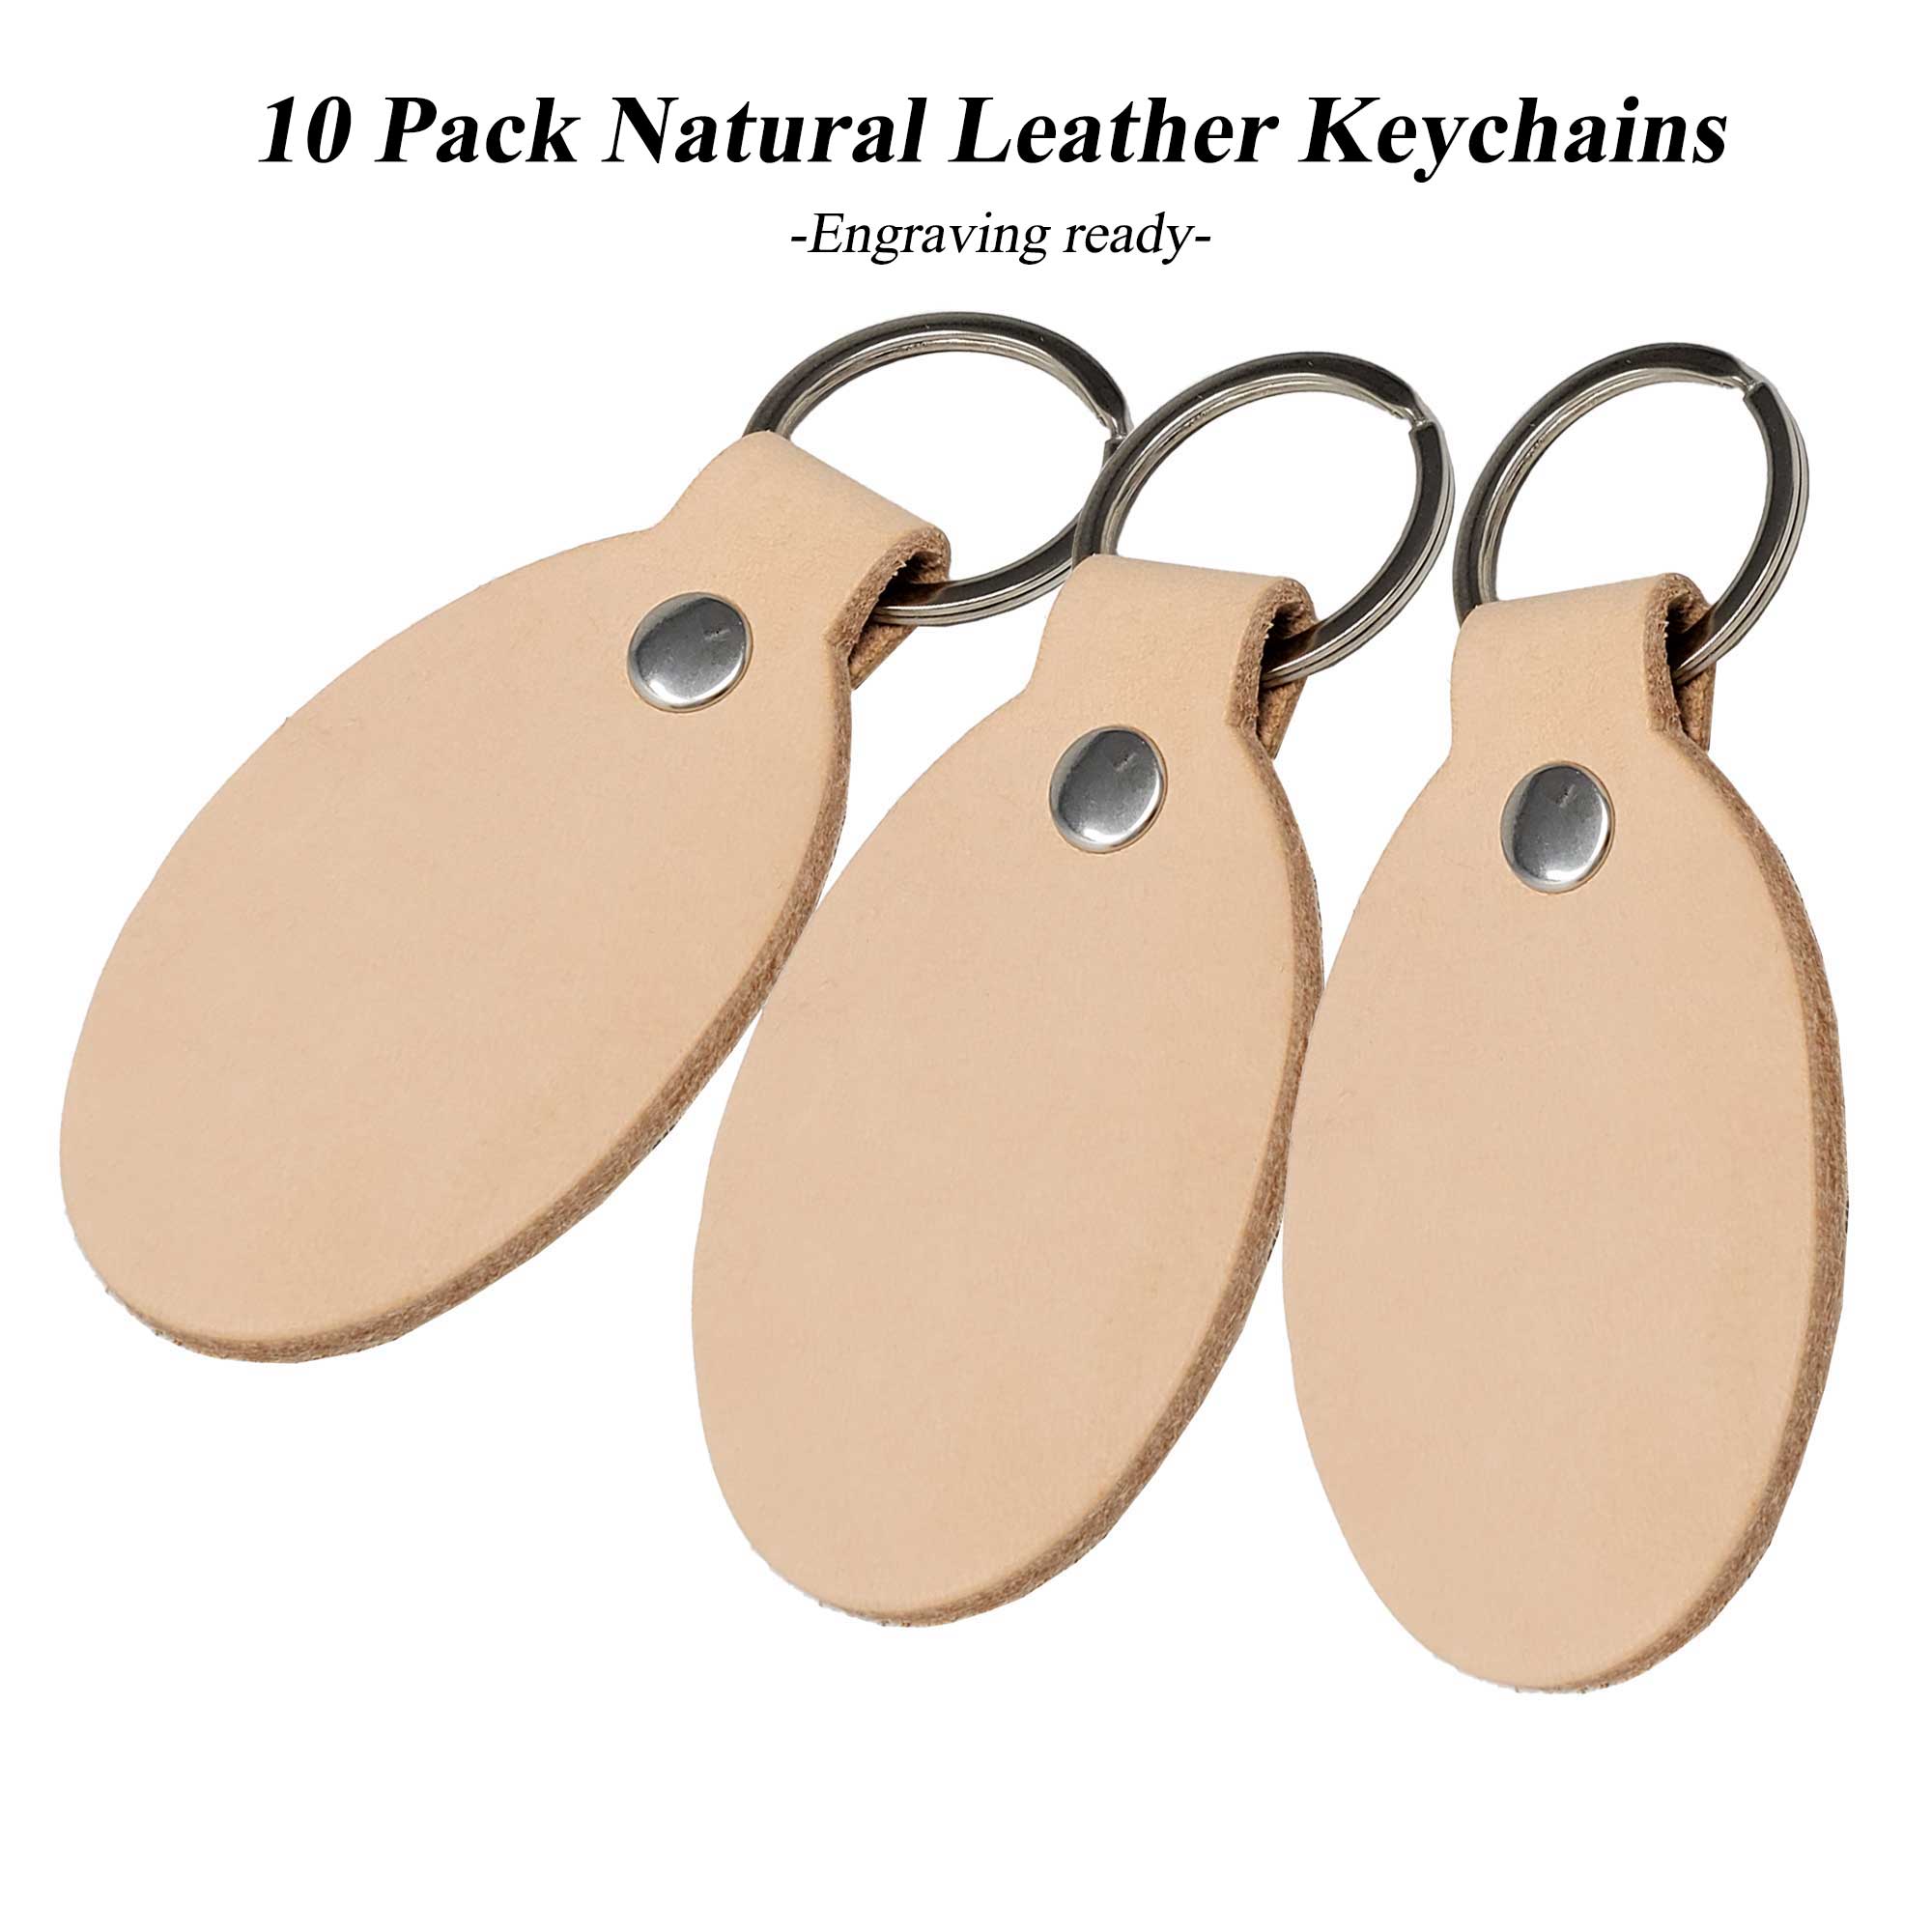 10 pack Blank Leather Keychains ready to be Personalized – Pitka Leather